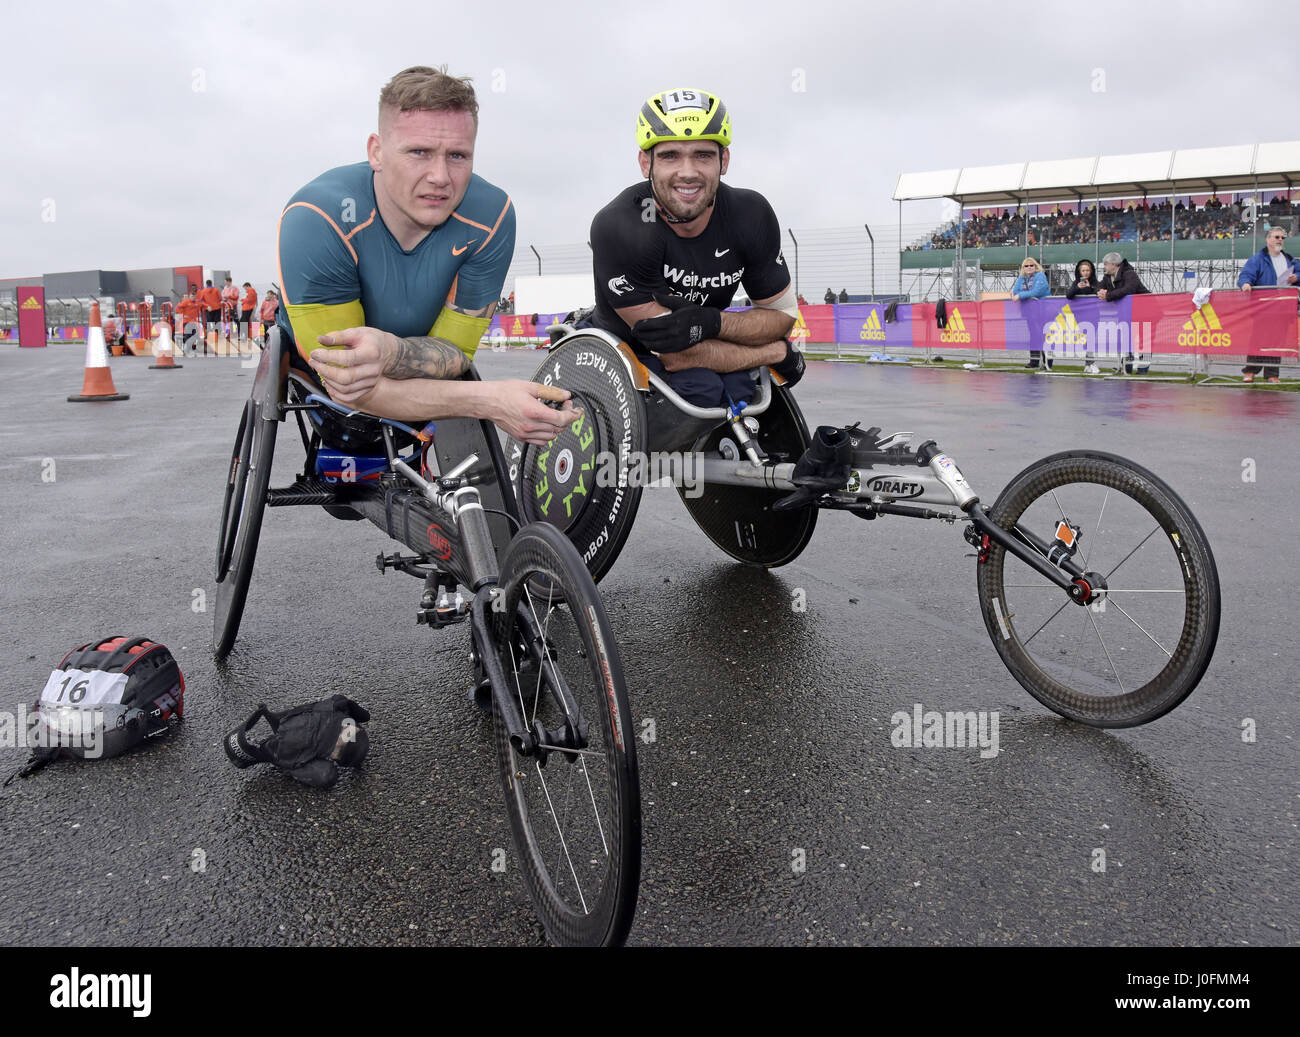 Woud meest gerucht JohnBoy Smith and David Weir at the Adidas Silverstone Half Marathon, a  road half marathon held each year on the Silverstone Circuit in  Northamptonshire. Featuring: JohnBoy Smith, David Weir Where: Silverstone,  Northamptonshire,